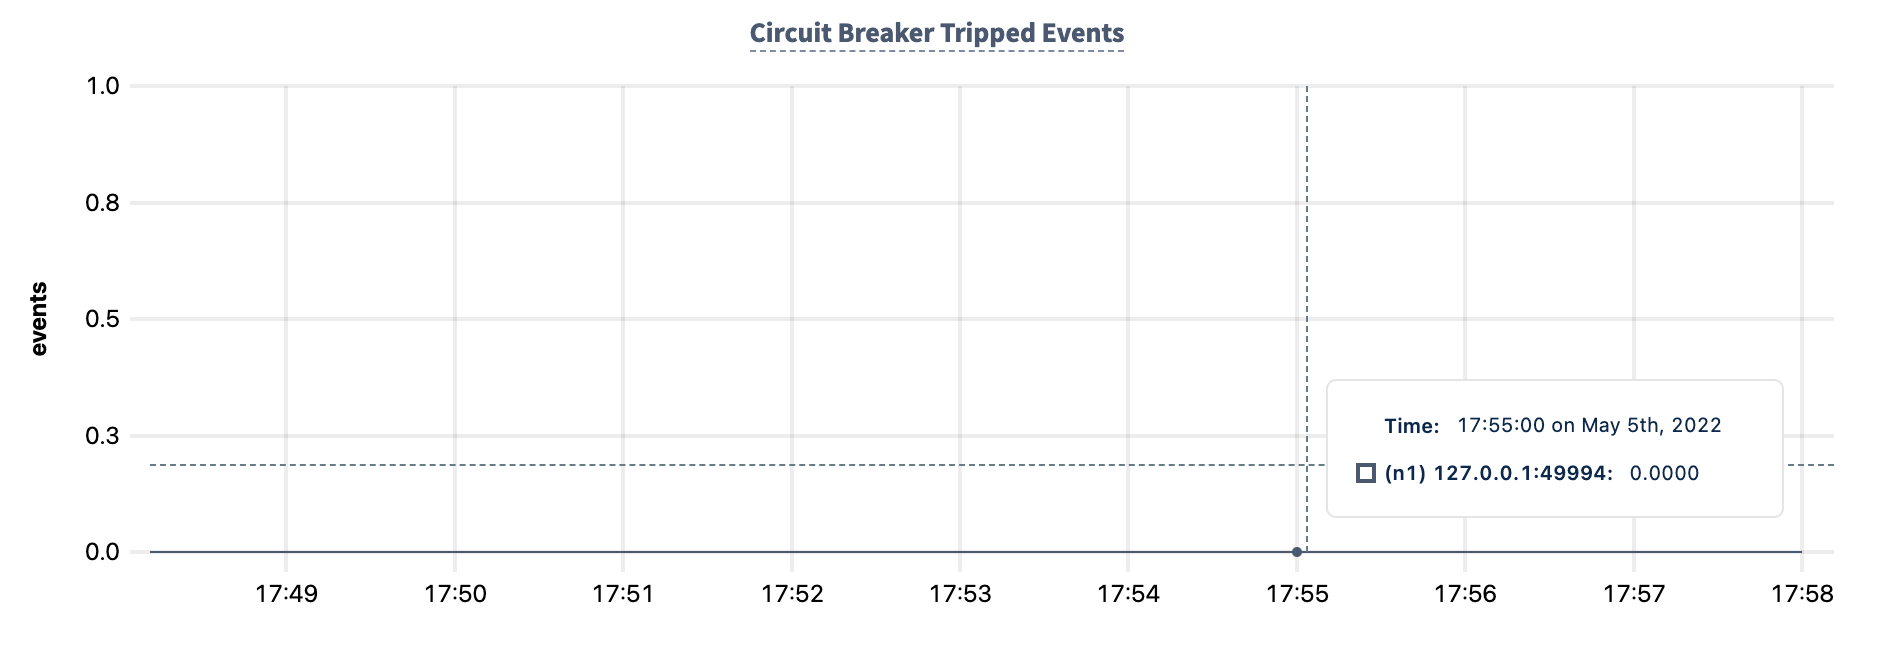 DB Console Circuit Breaker Tripped Events